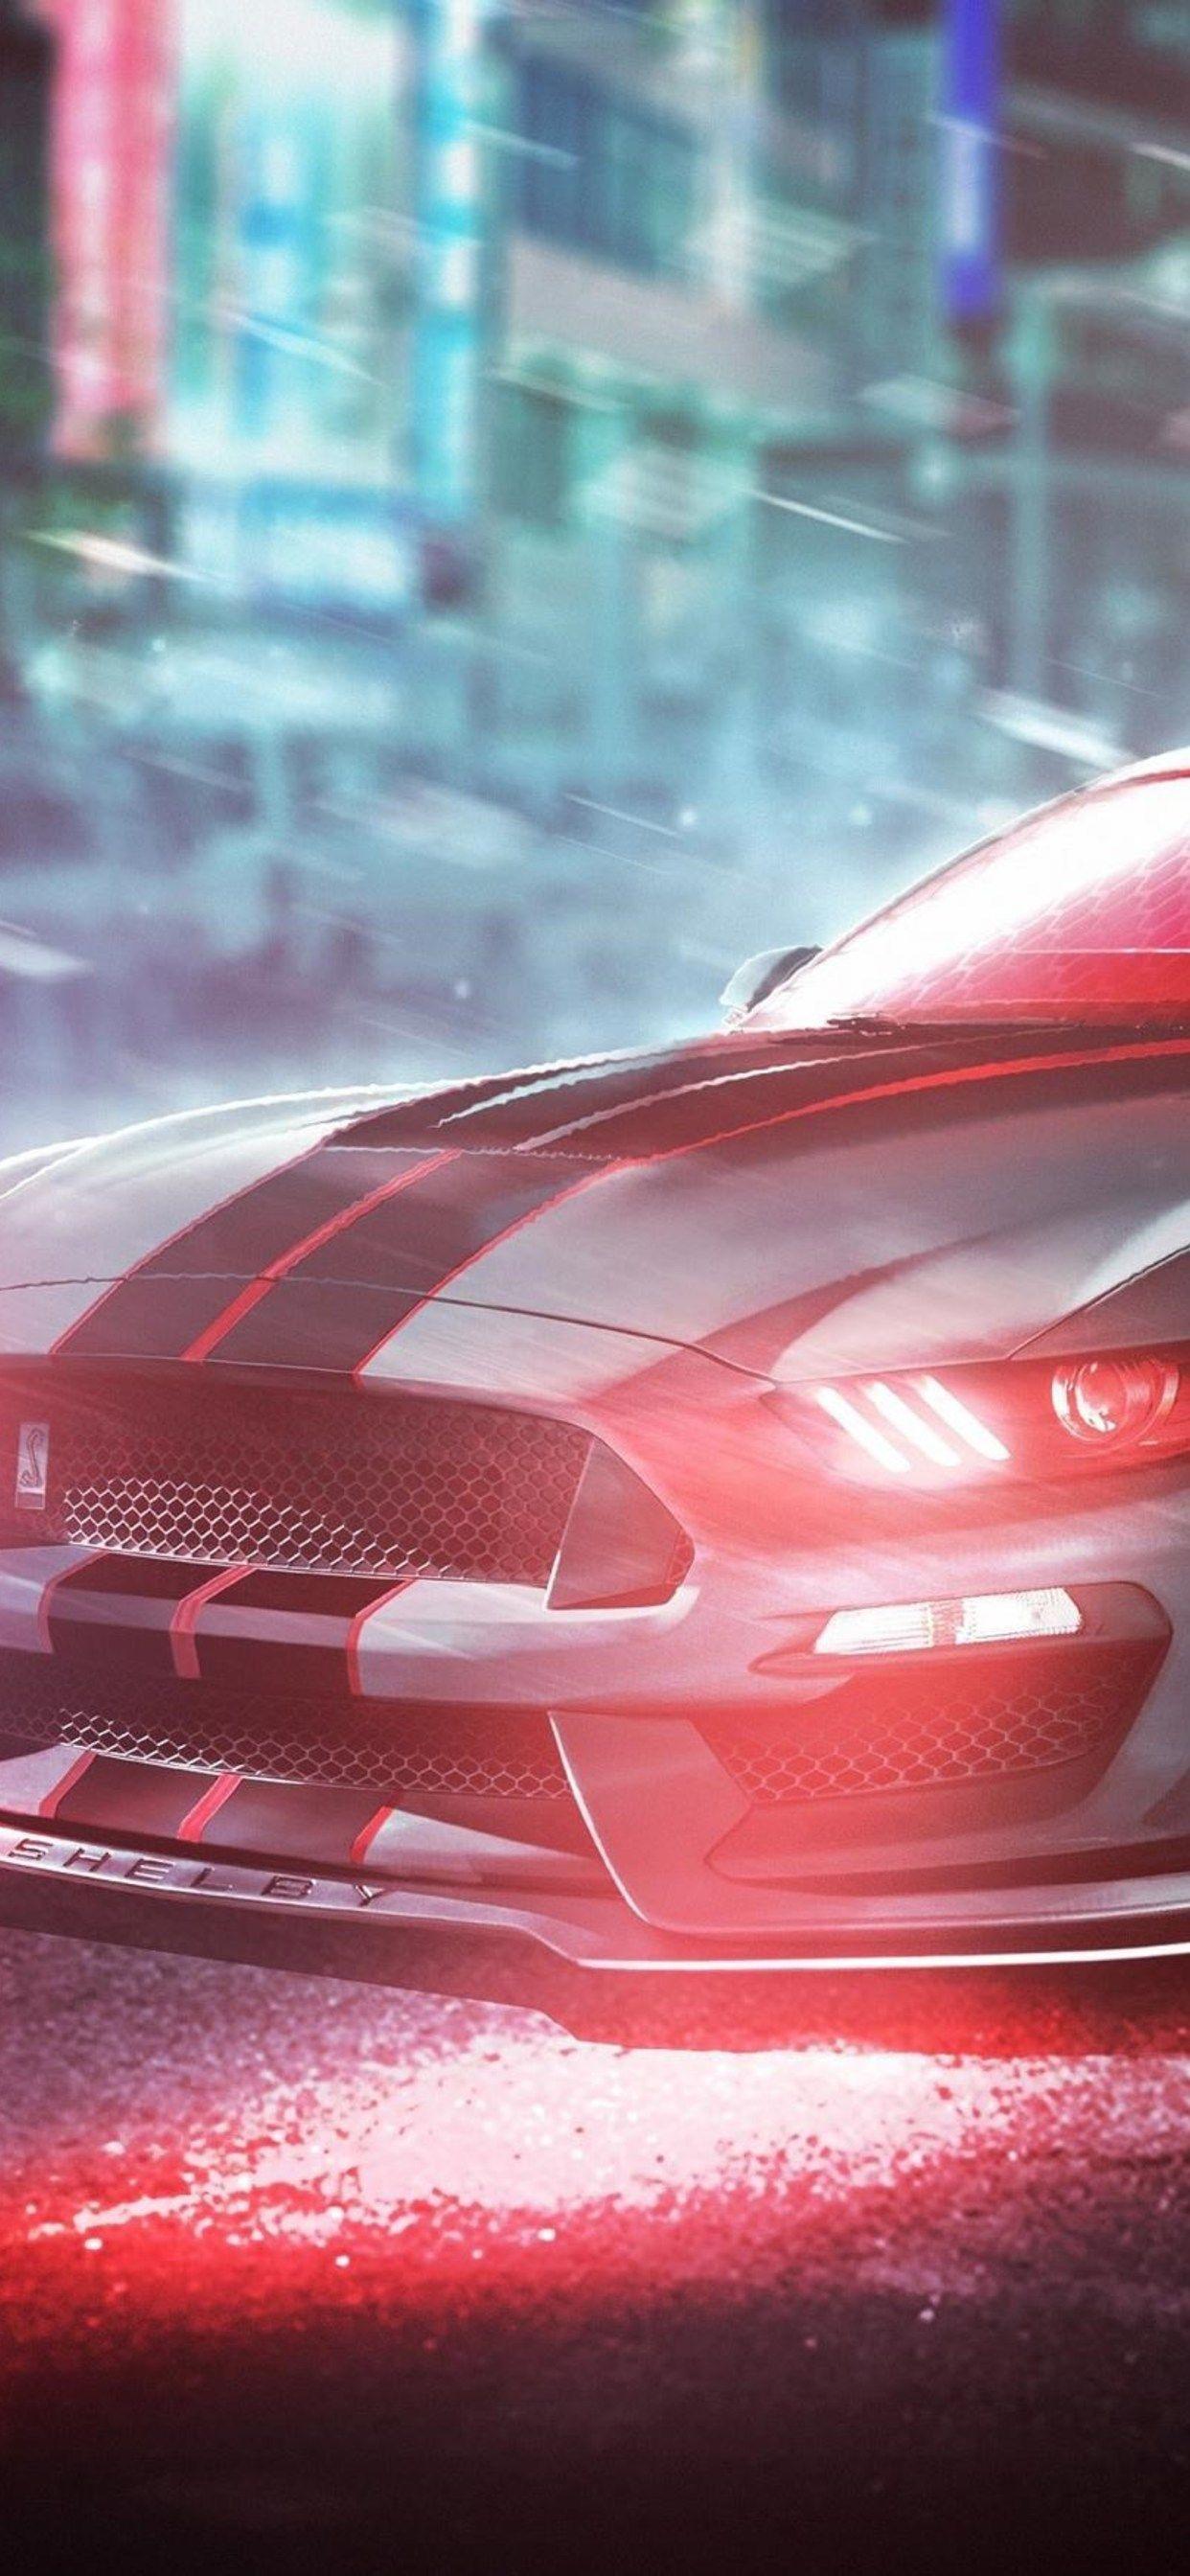 Cars iPhone Wallpaper Free Cars iPhone Background